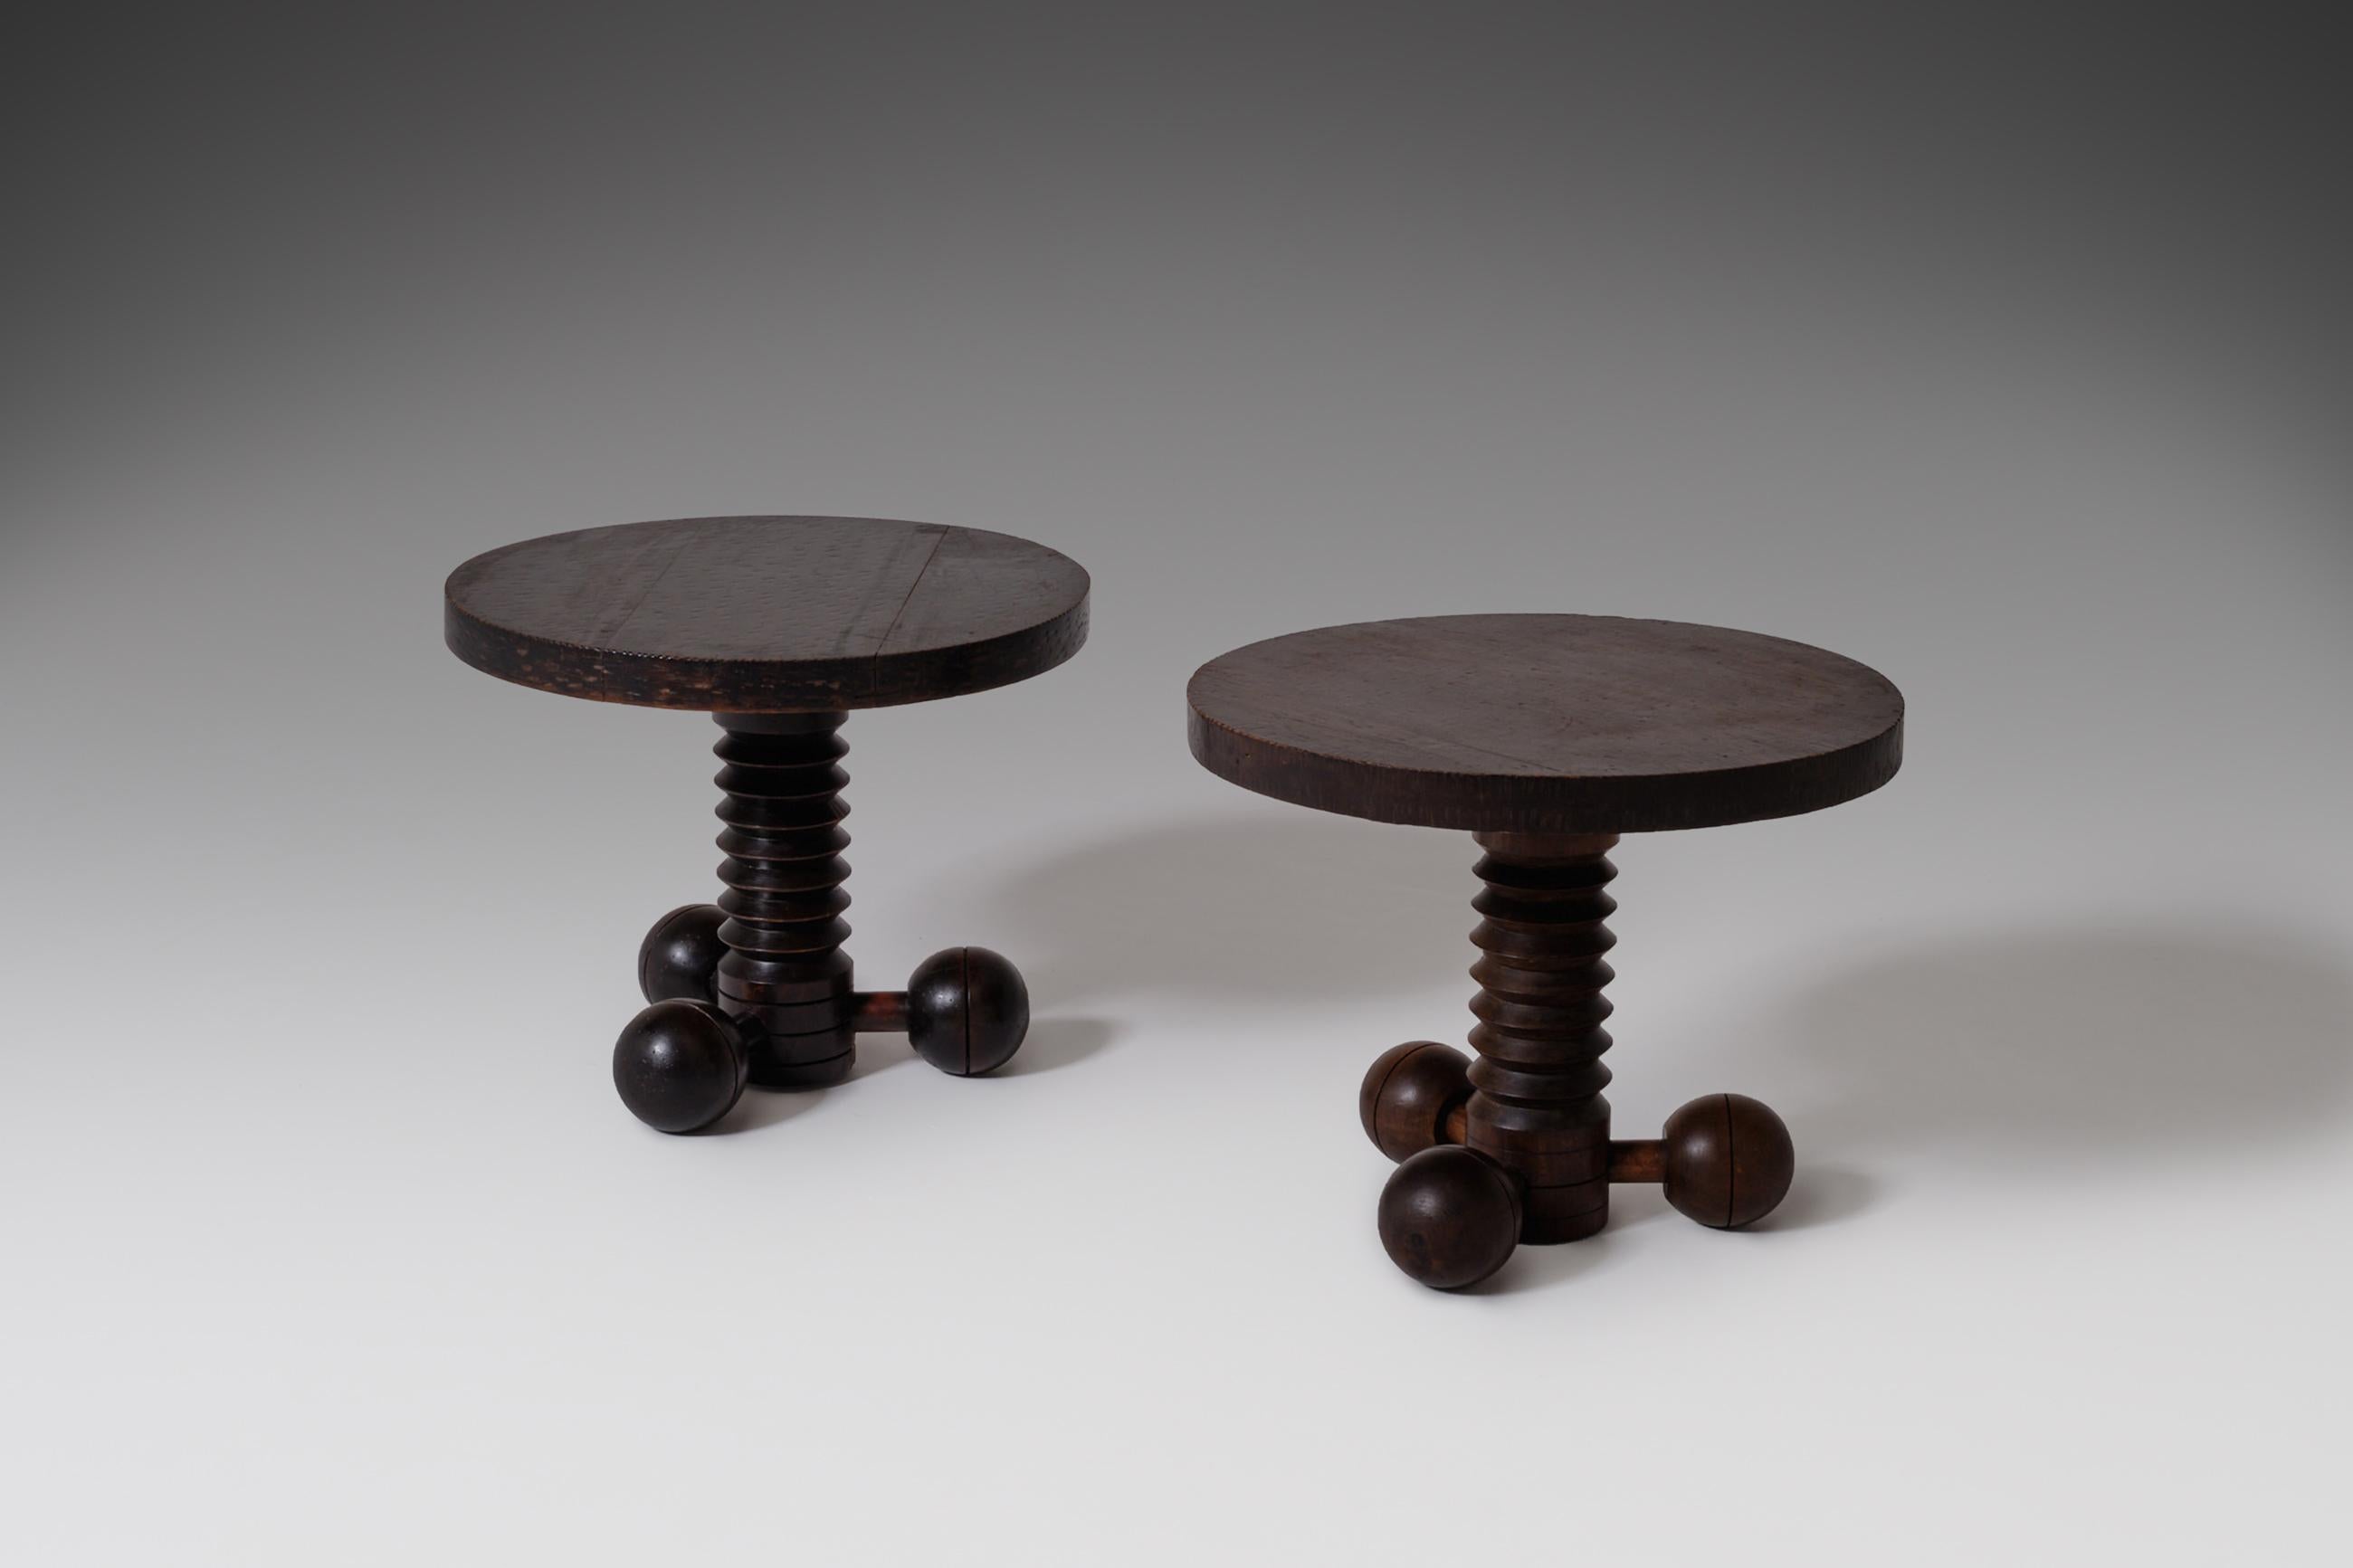 Rare set two Art Deco side tables by Charles Dudouyt, France, 1940s. A dark stained mahogany round tabletop rests on a beautiful detailed base constructed out of a corkscrew shaped centre collum, the base of the table is made out three wooden balls;